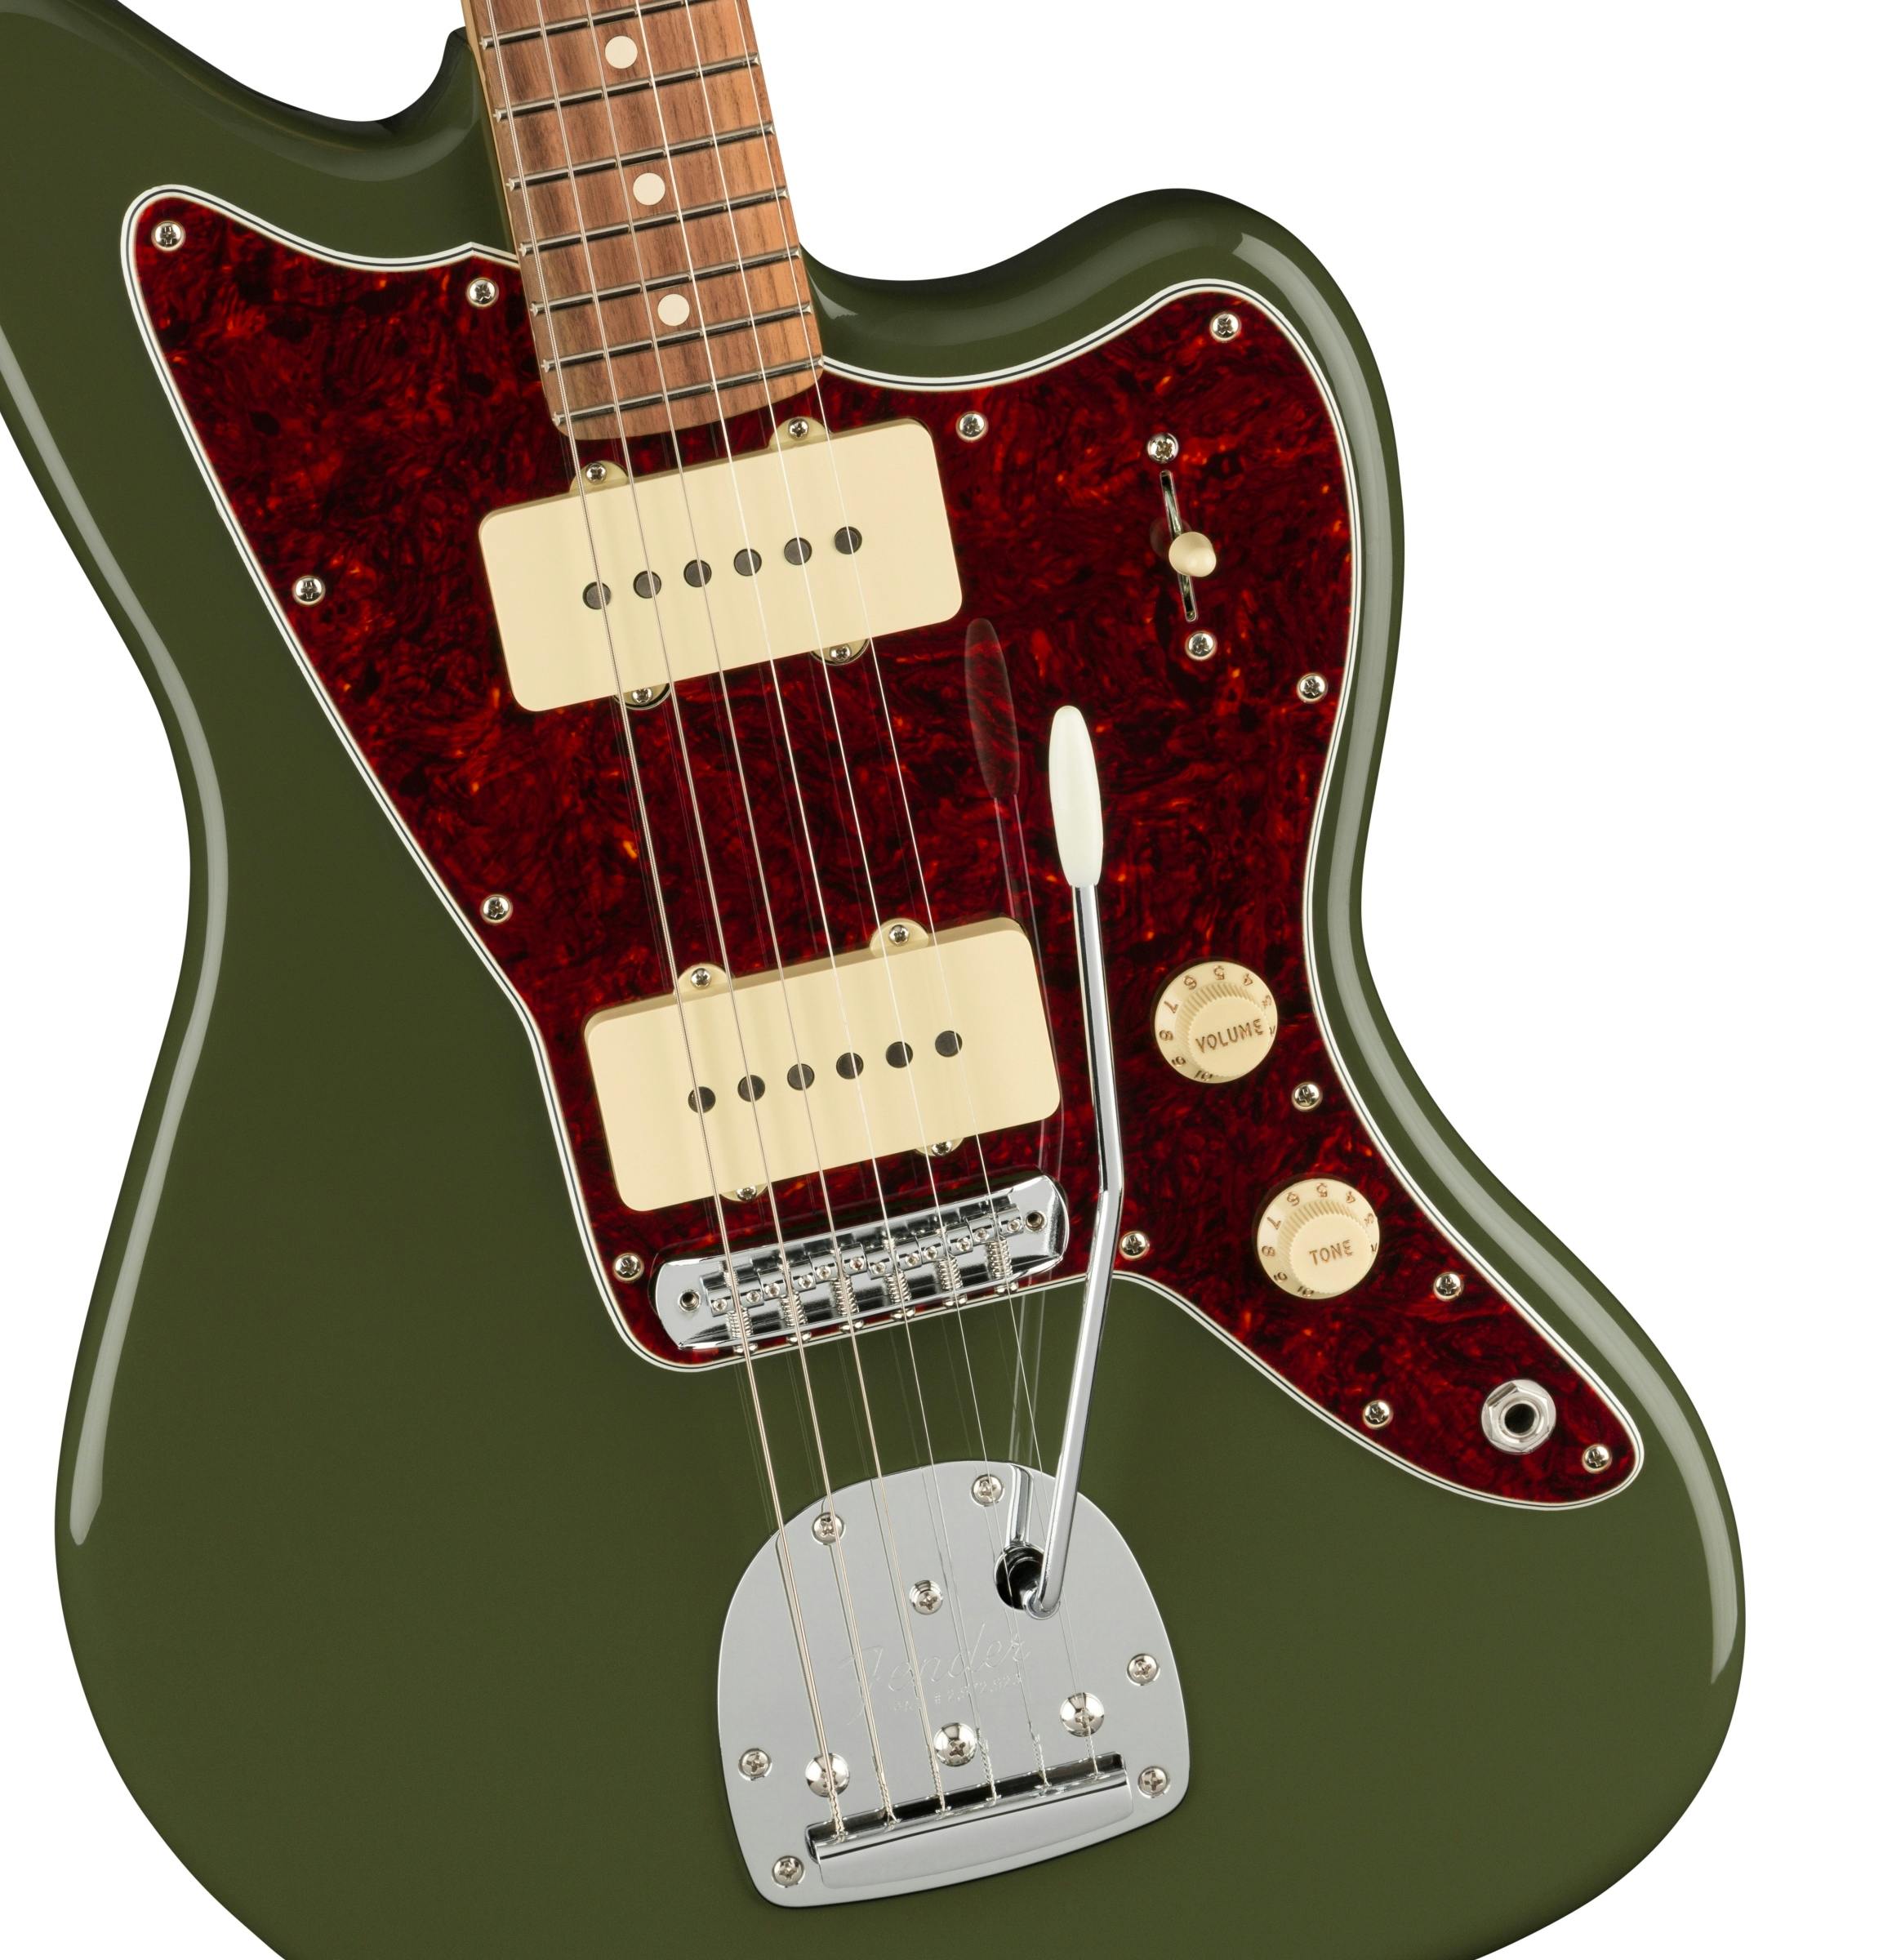 Fender Limited Edition Player Jazzmaster in Olive Green with